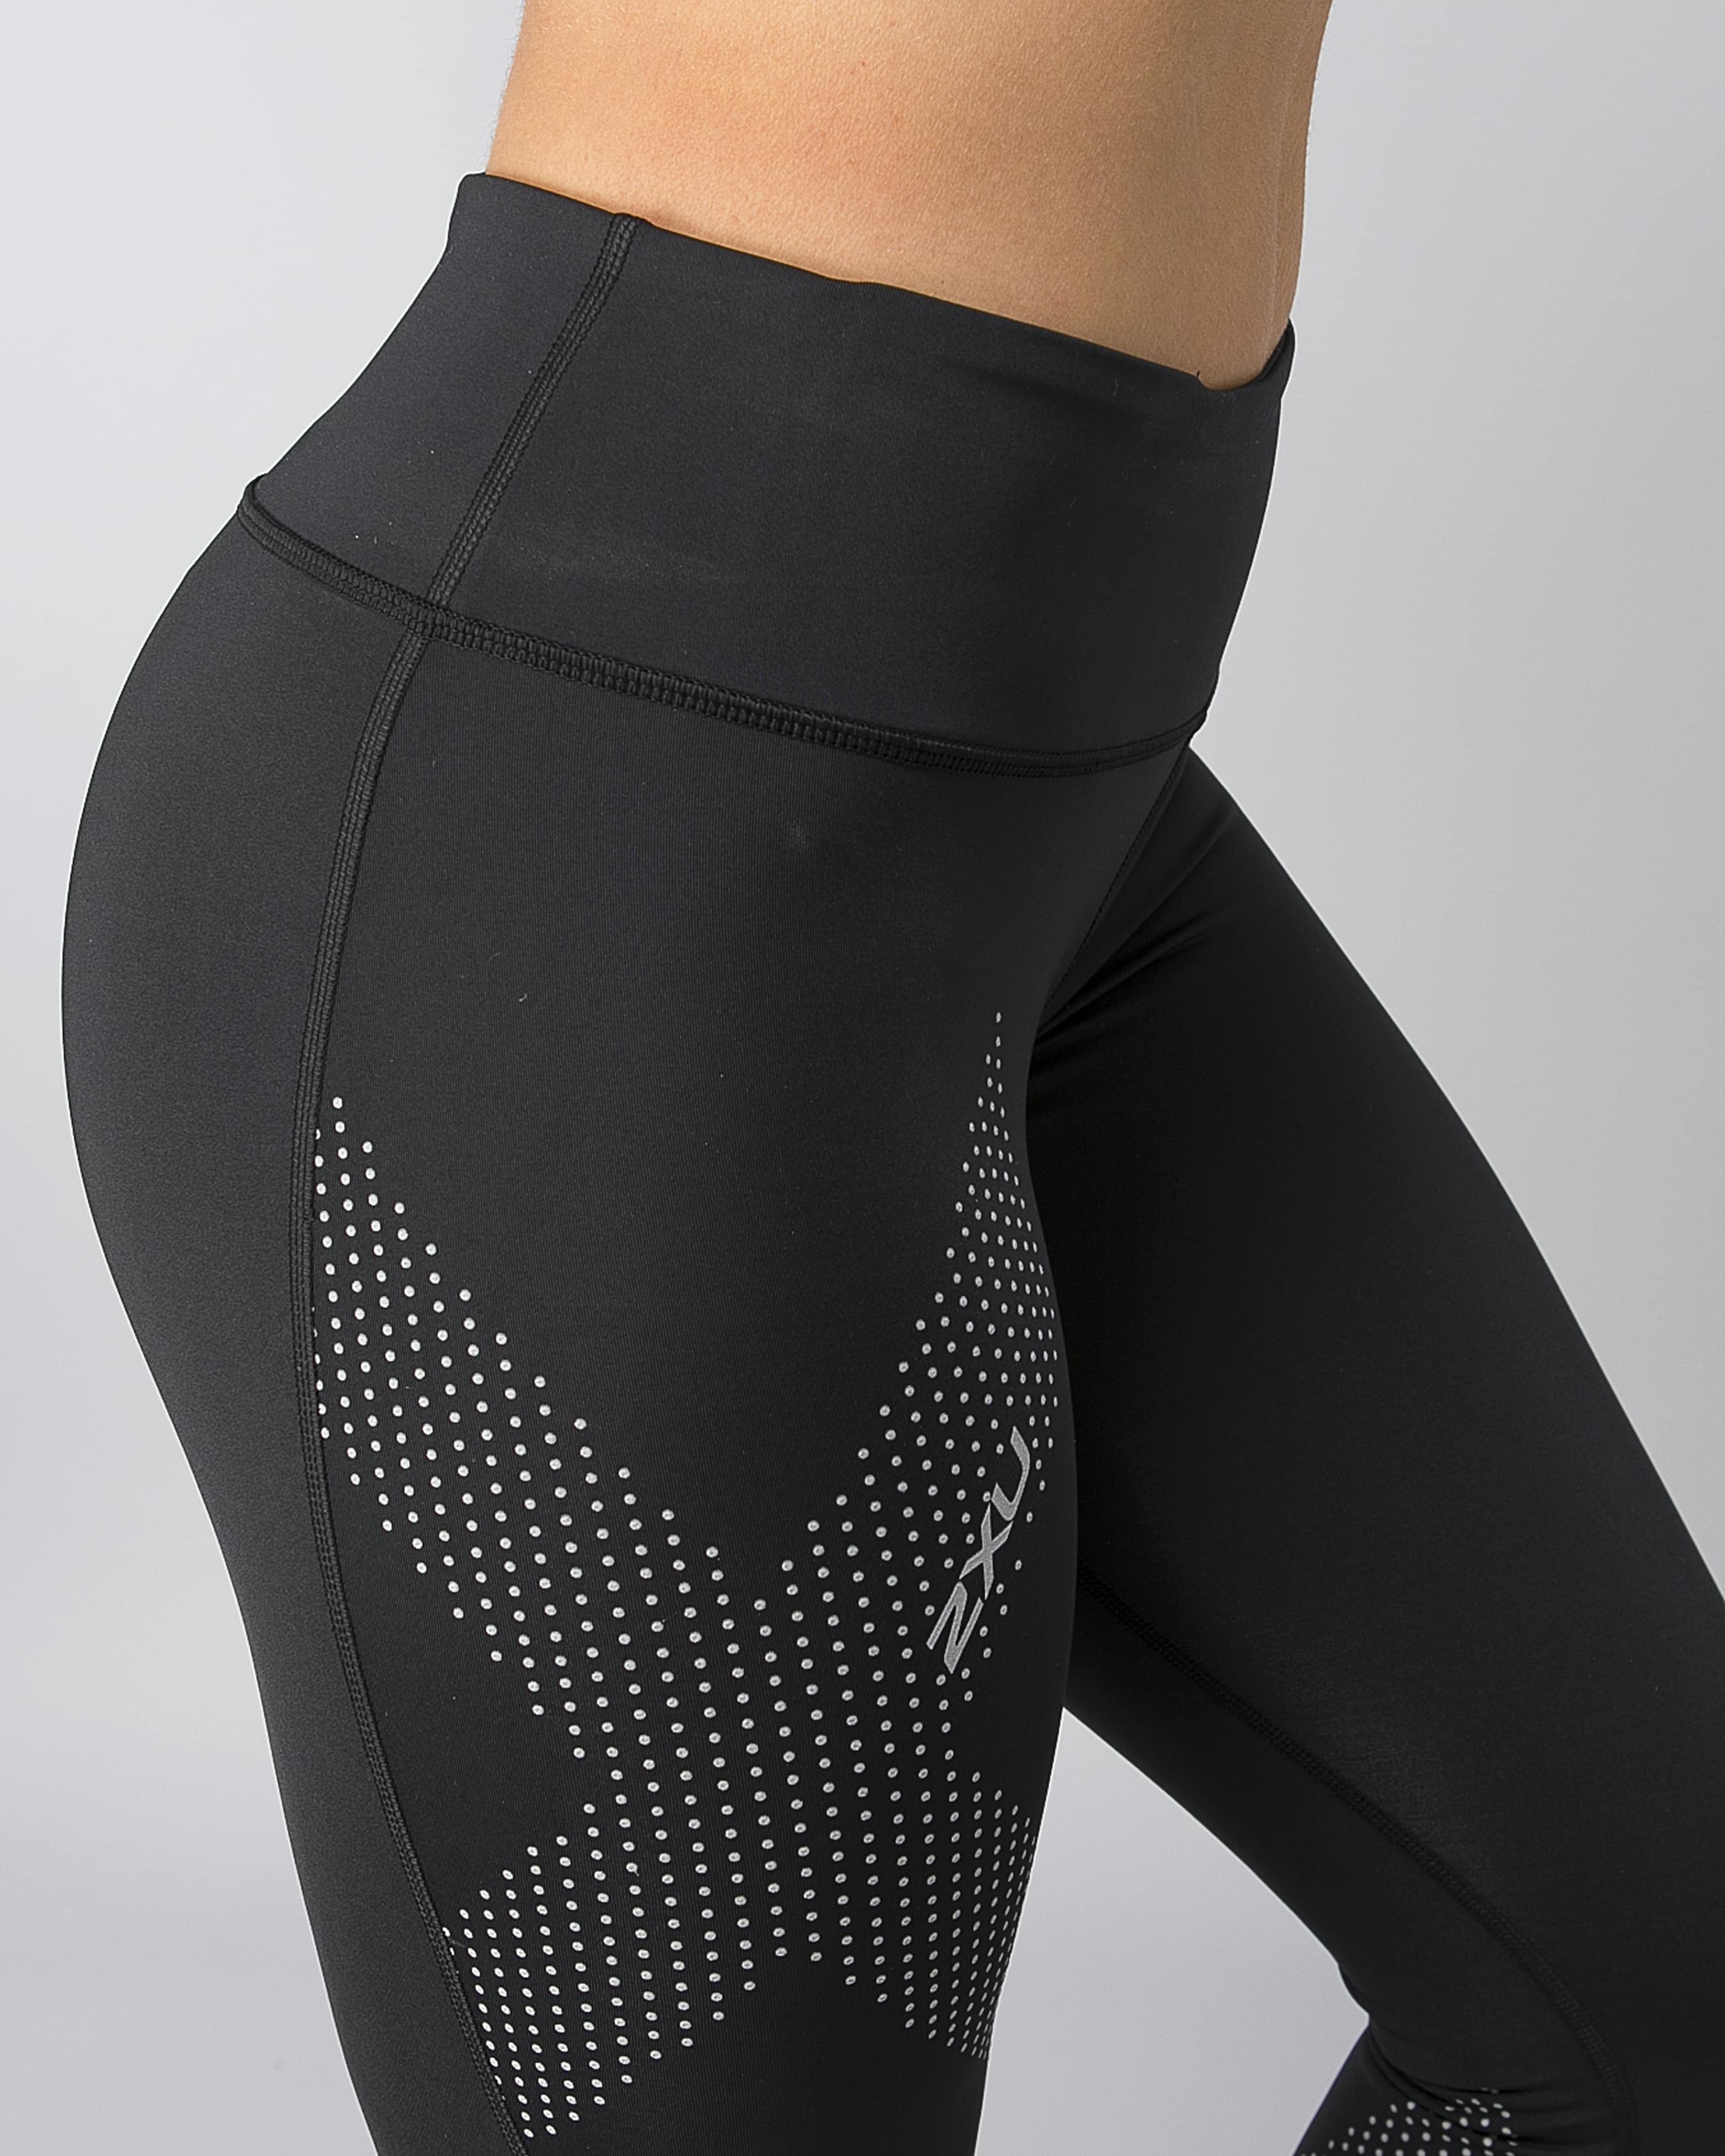 konto Ingeniører mikrocomputer 2XU Mid-Rise Compression Tights - Black/Dotted Reflective - Tights.no